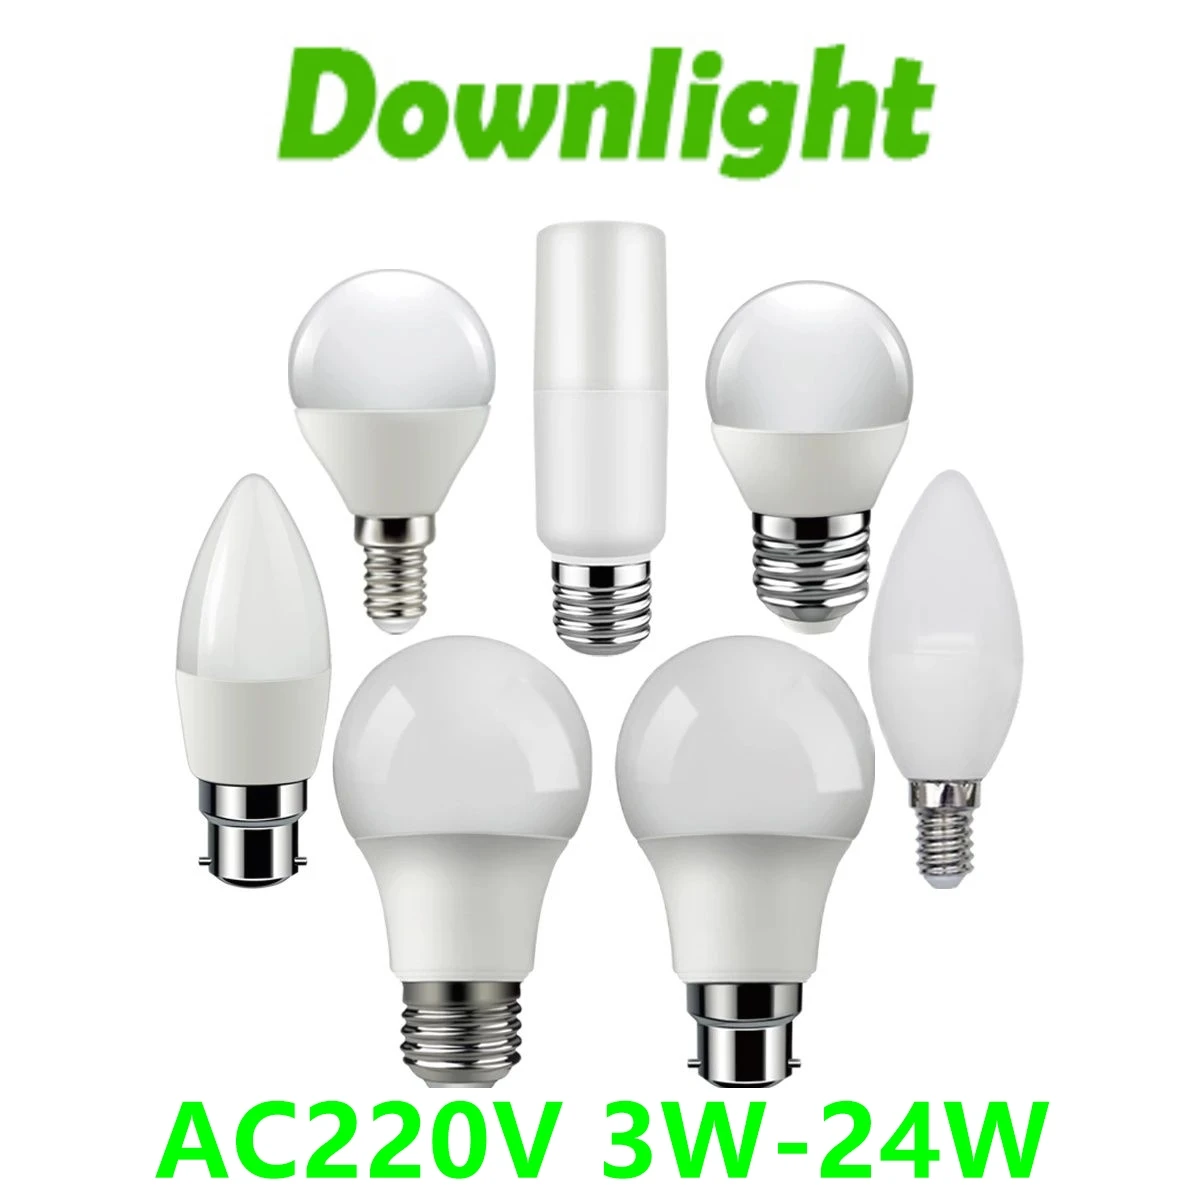 

LED energy saving bulb AC220V 3w-24w E14 E27 B22 3000K 4000K 6000K Lamp With Ce Rohs For Home Office Interior Decoration